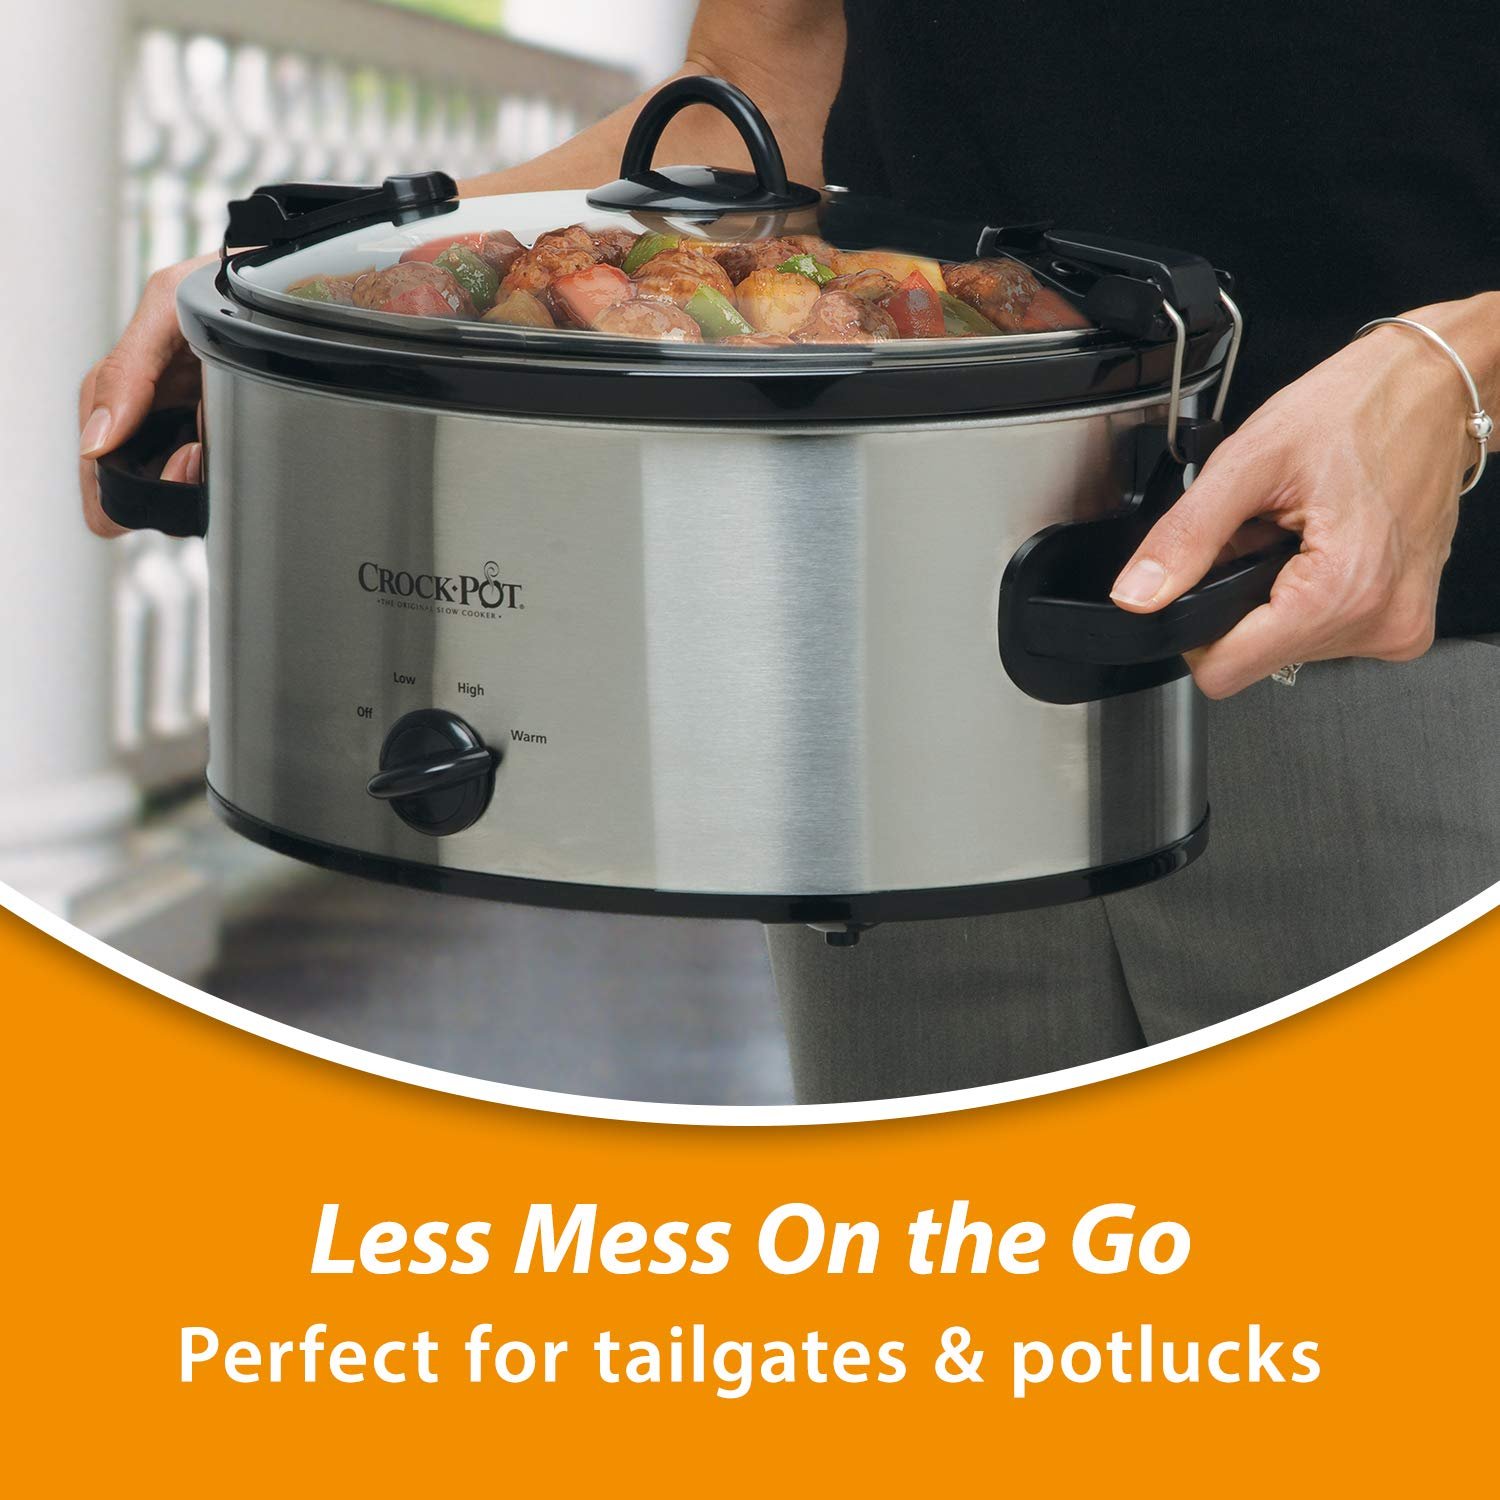 Crock-Pot Cook & Carry 6-Quart Oval Portable Manual Slow Cooker  Stainless Steel SCCPVL600S - image 2 of 5